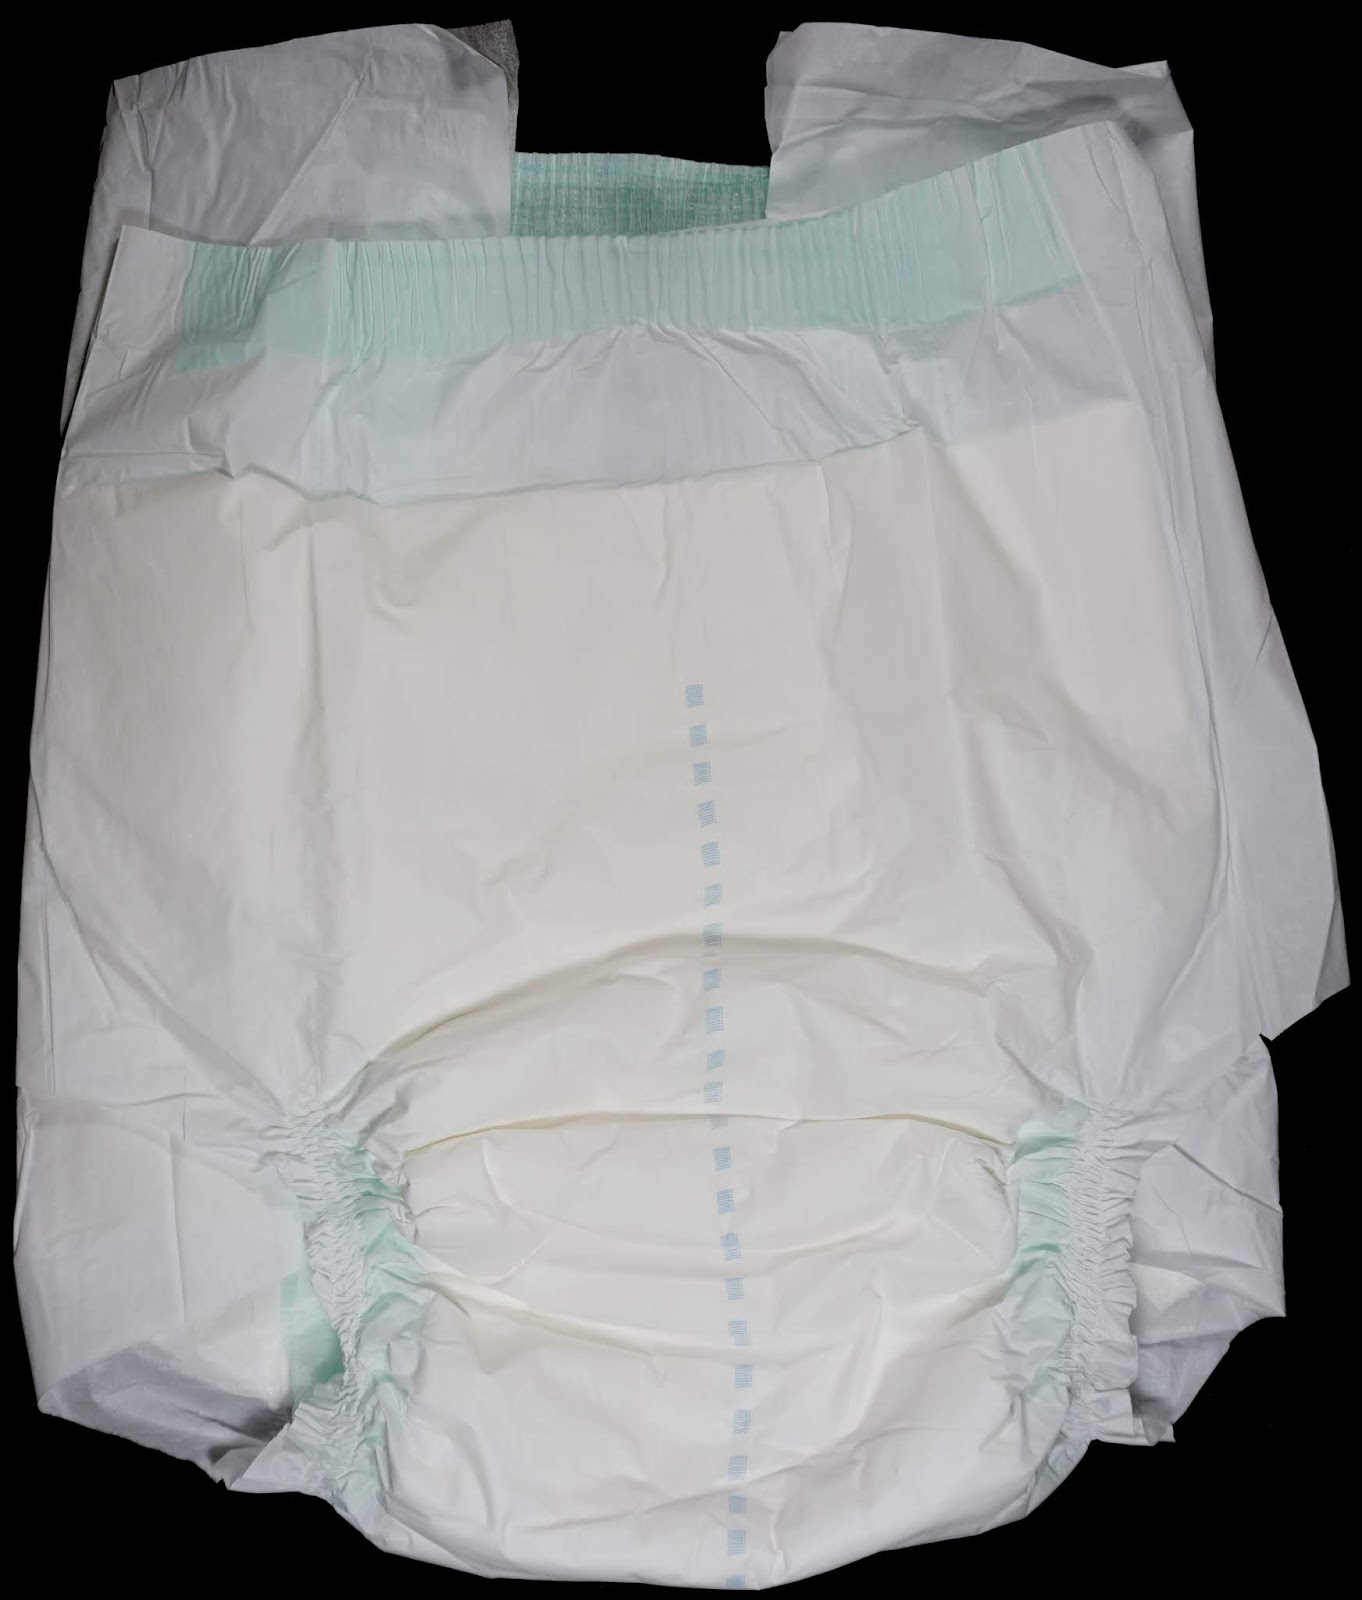 Diaper Metrics Depend Protection with Tabs (S/M) Adult Diaper Review